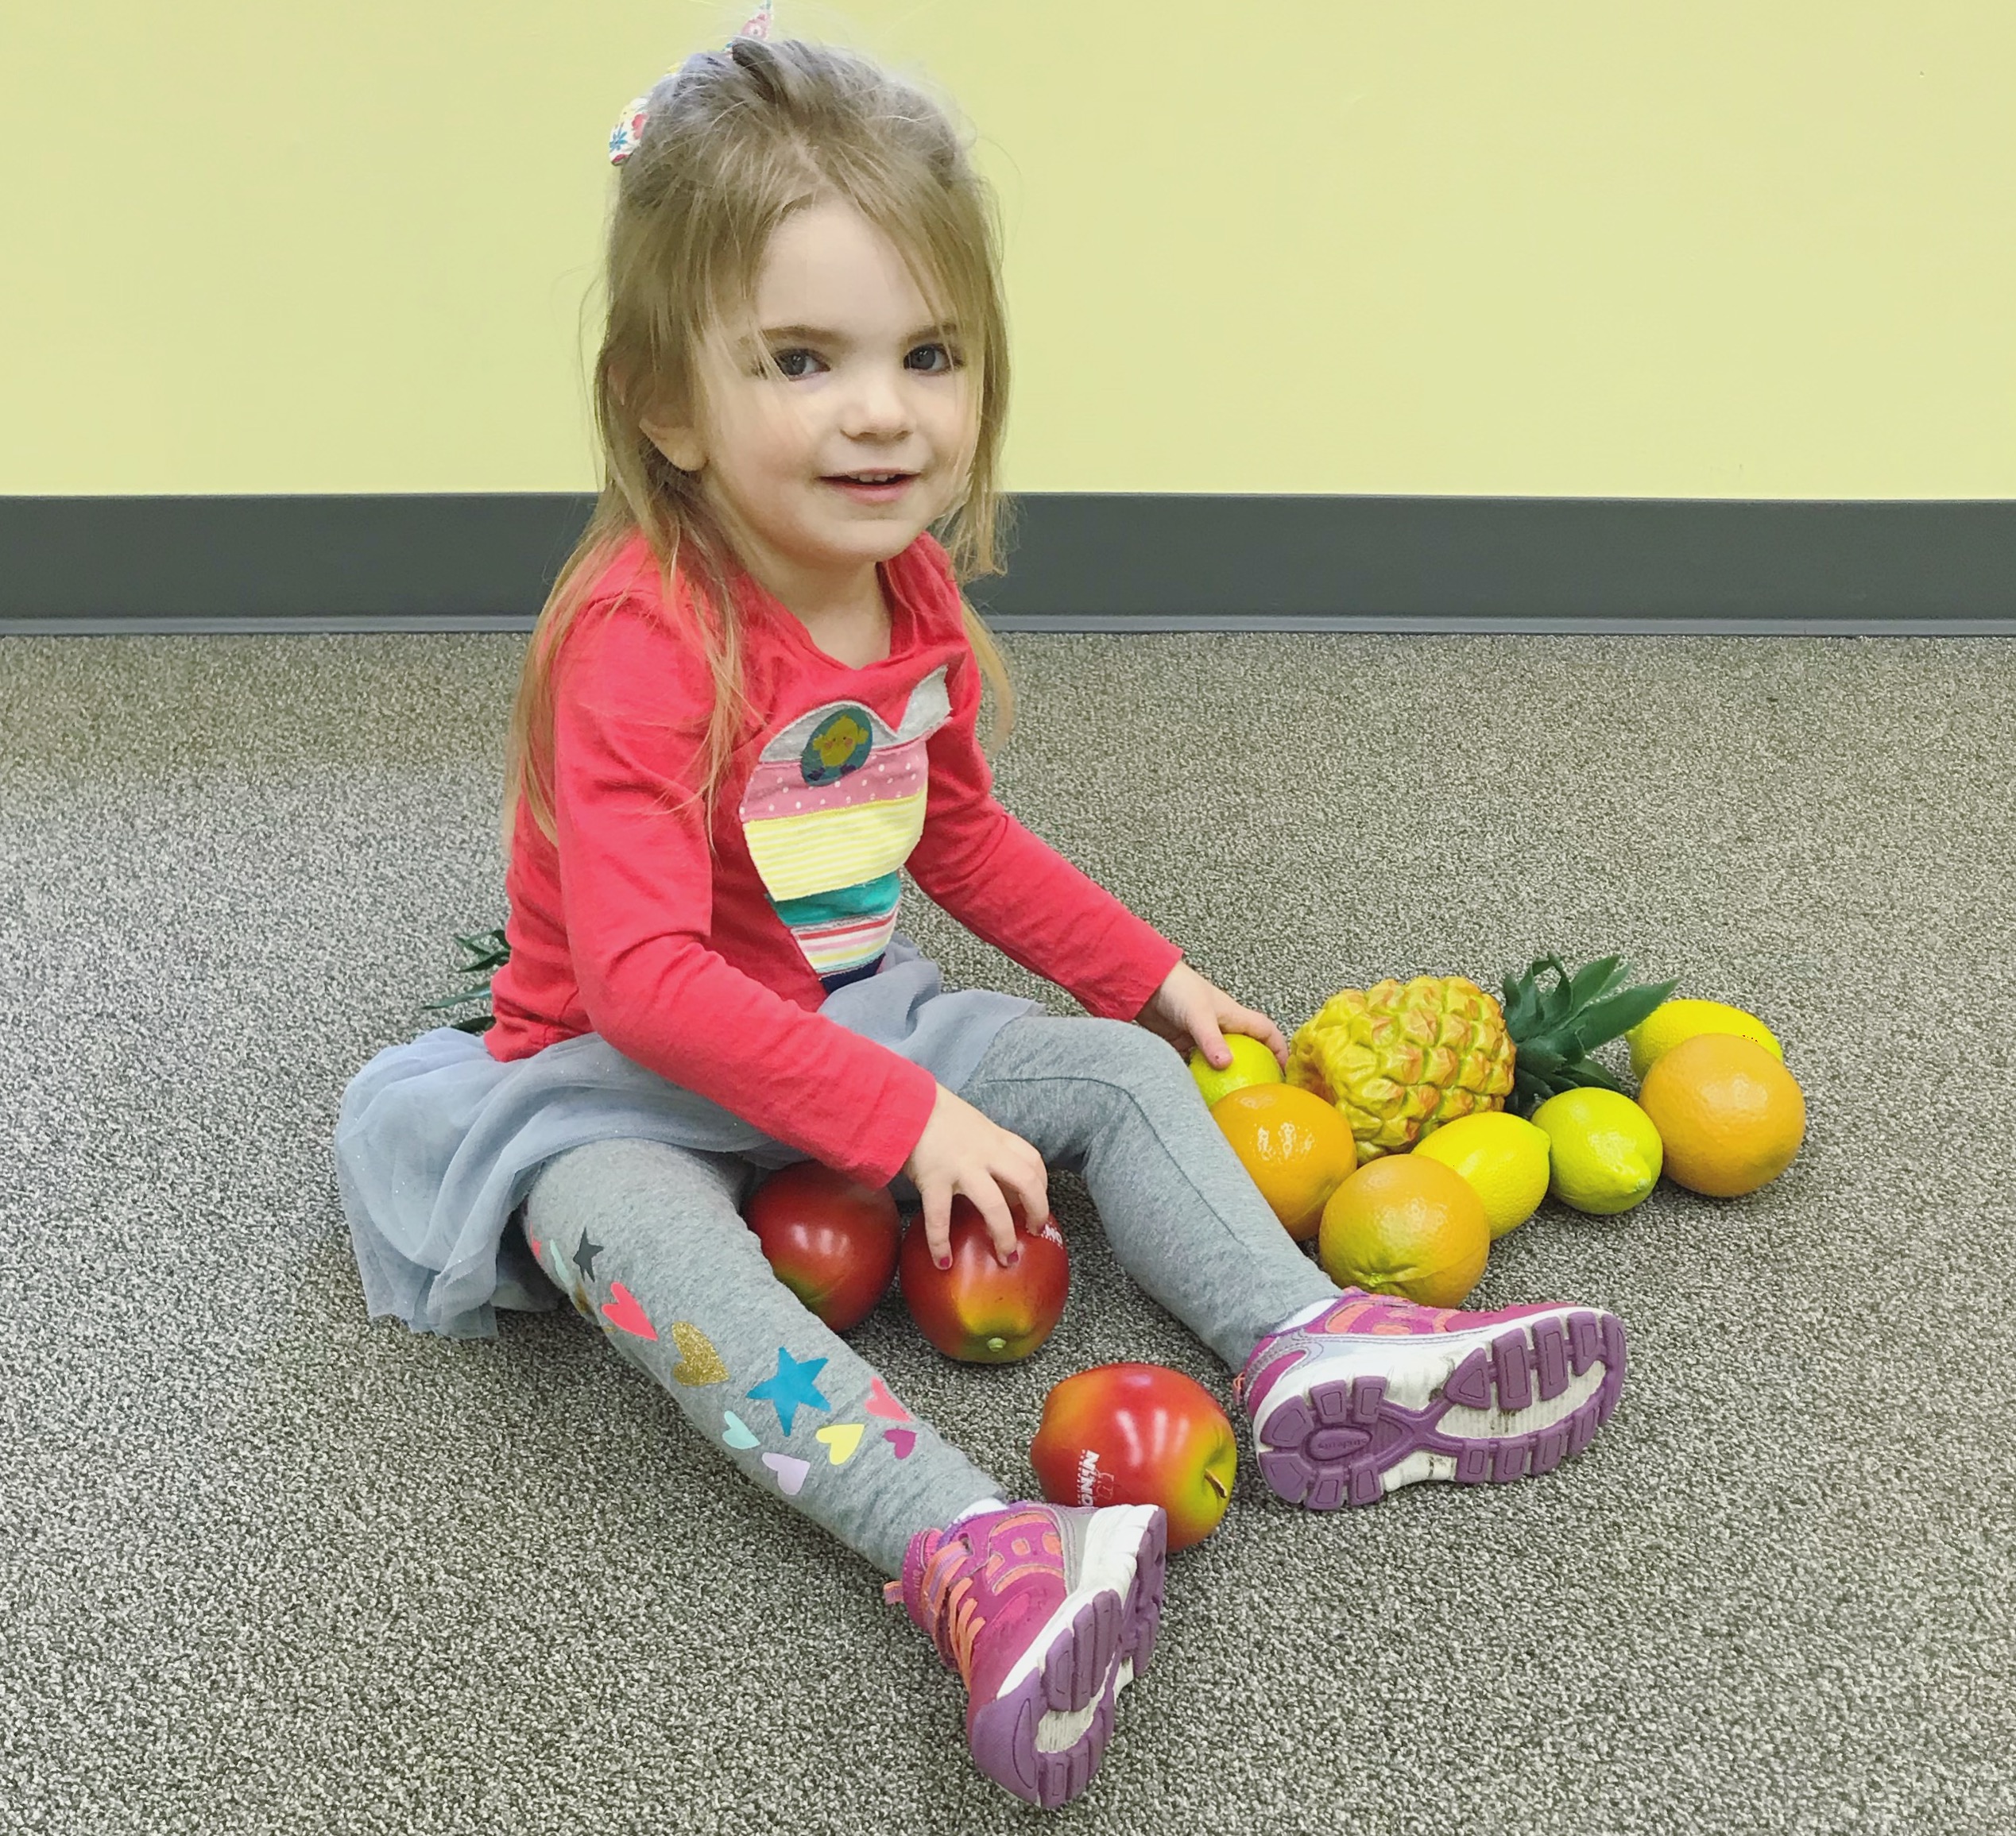 Achieving Goals in Music Therapy with Fruit Shakers